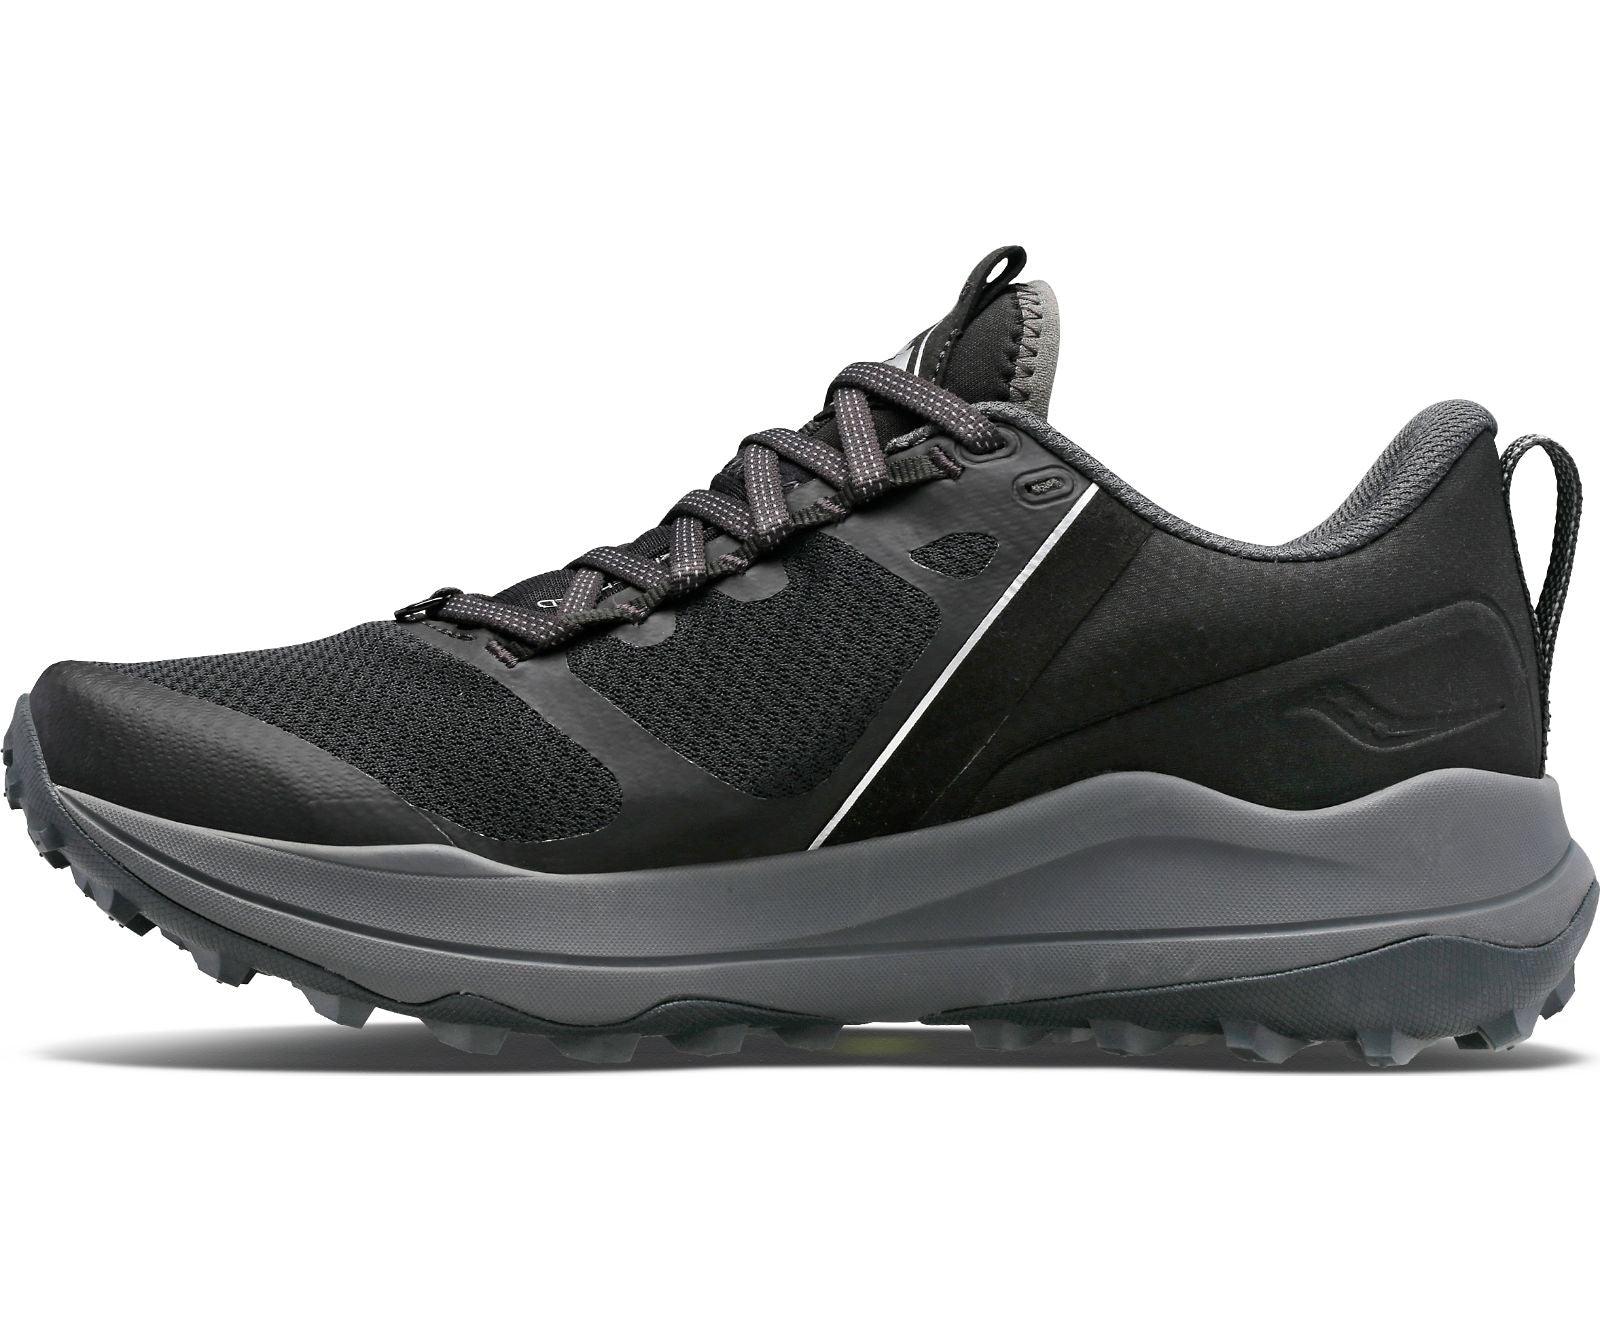 Medial view of the Women's Xodus Ultra trail shoe by Saucony in the color Black/Charcoal